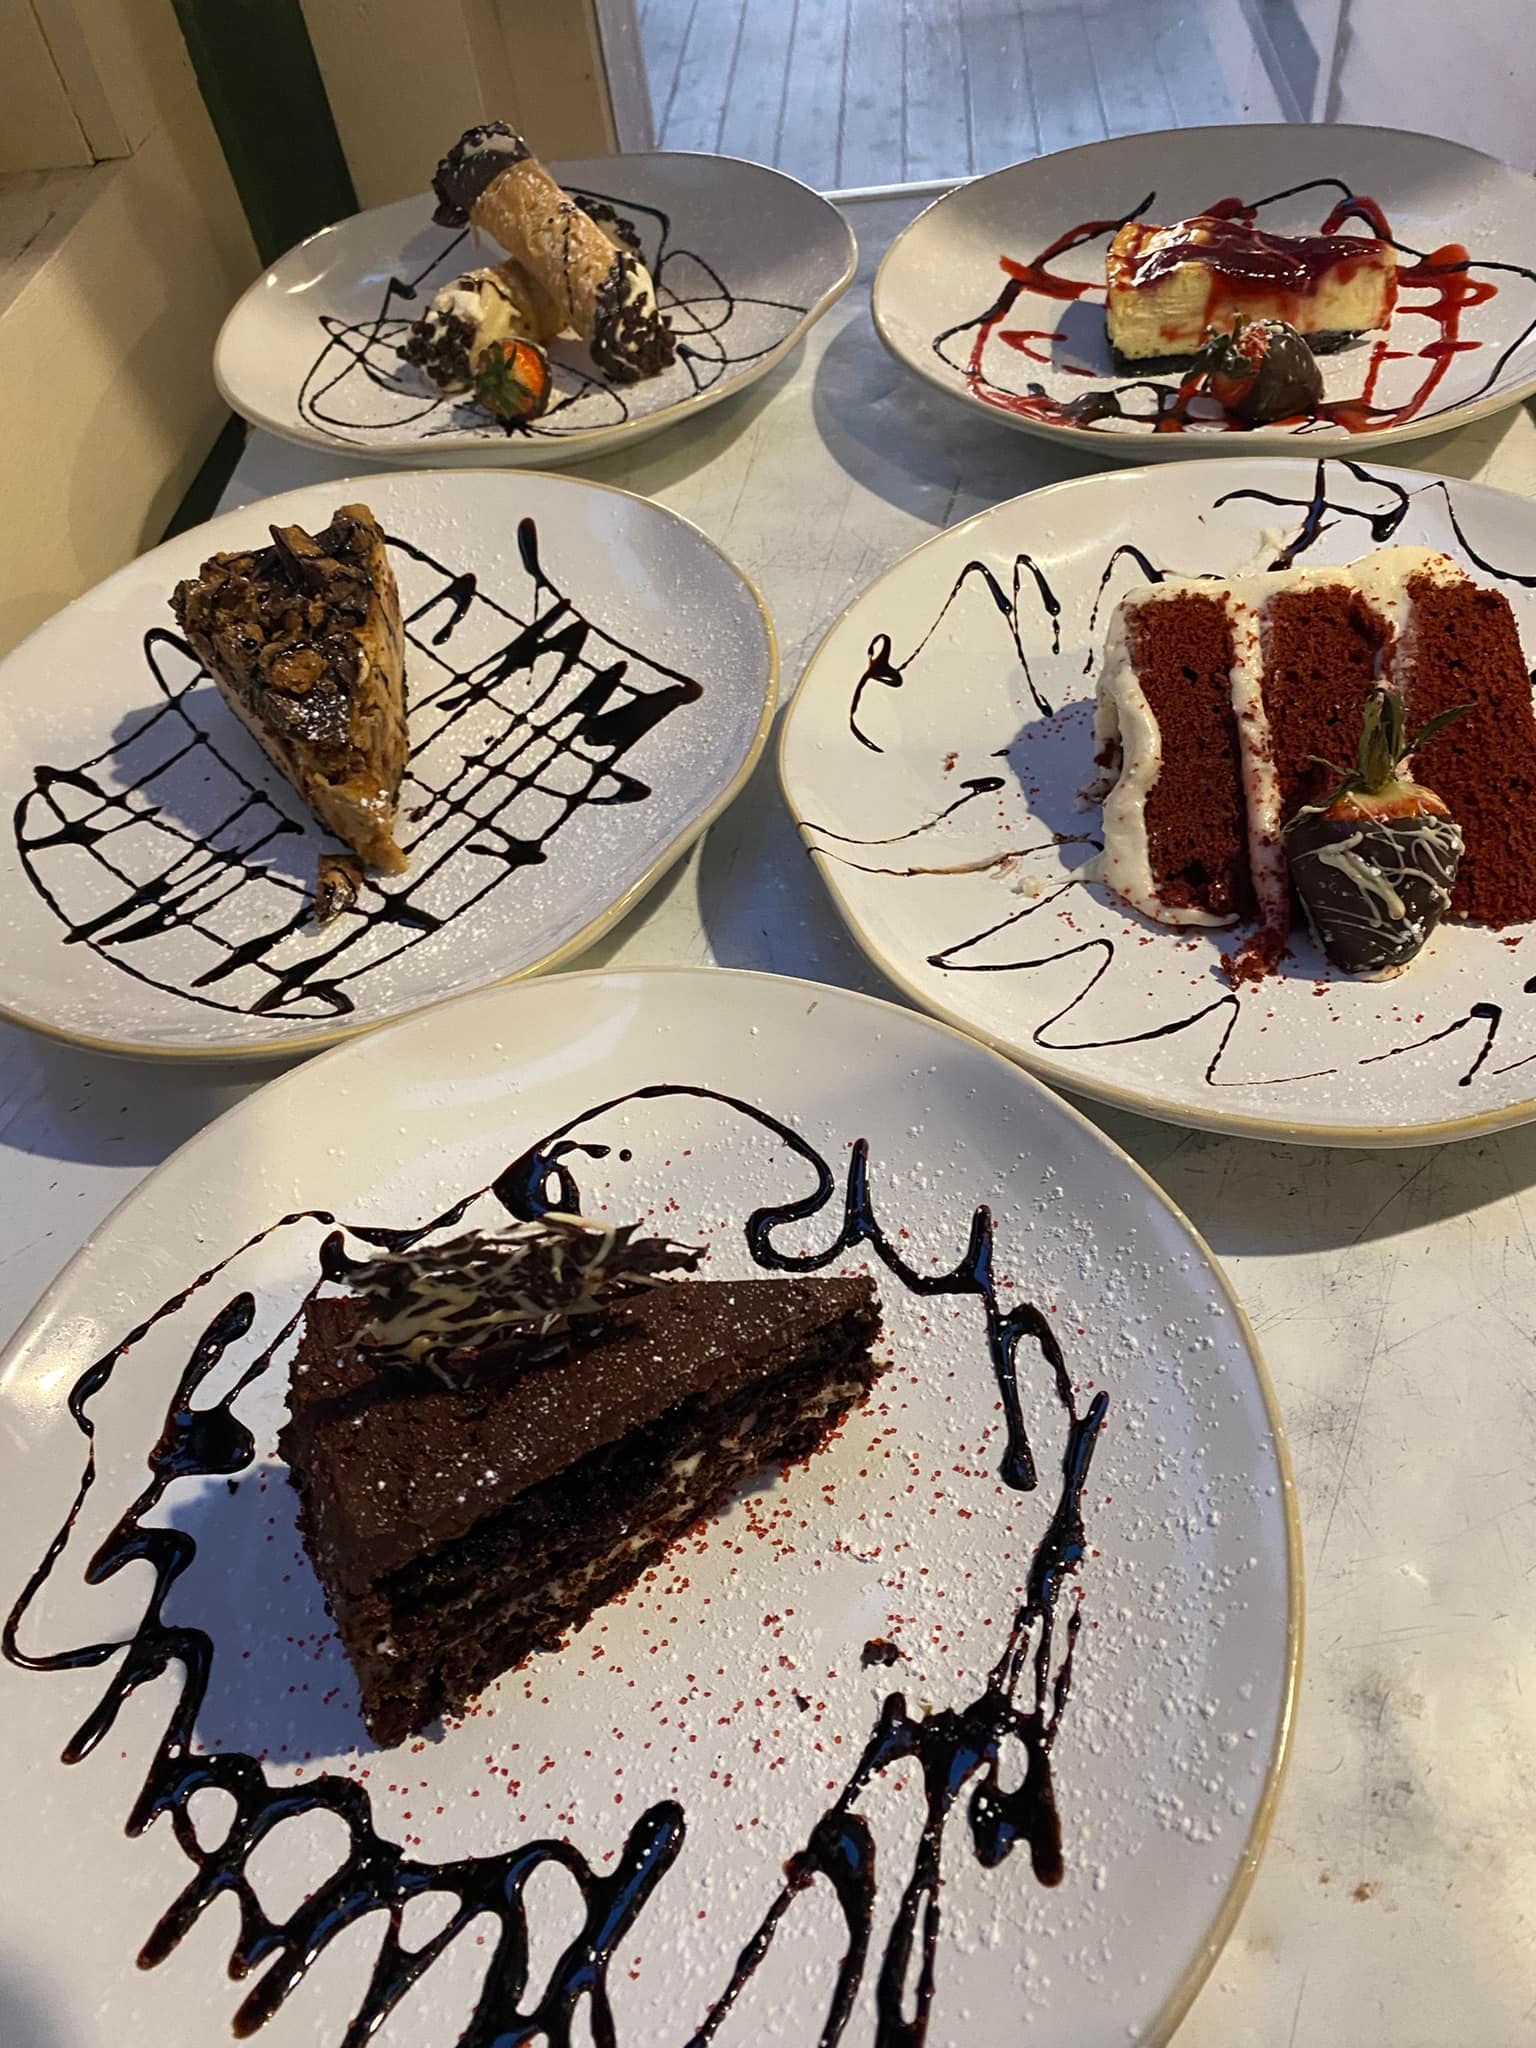 Four desserts, including, chocolate cake, red velvet cake, cheese cake and cannolis.